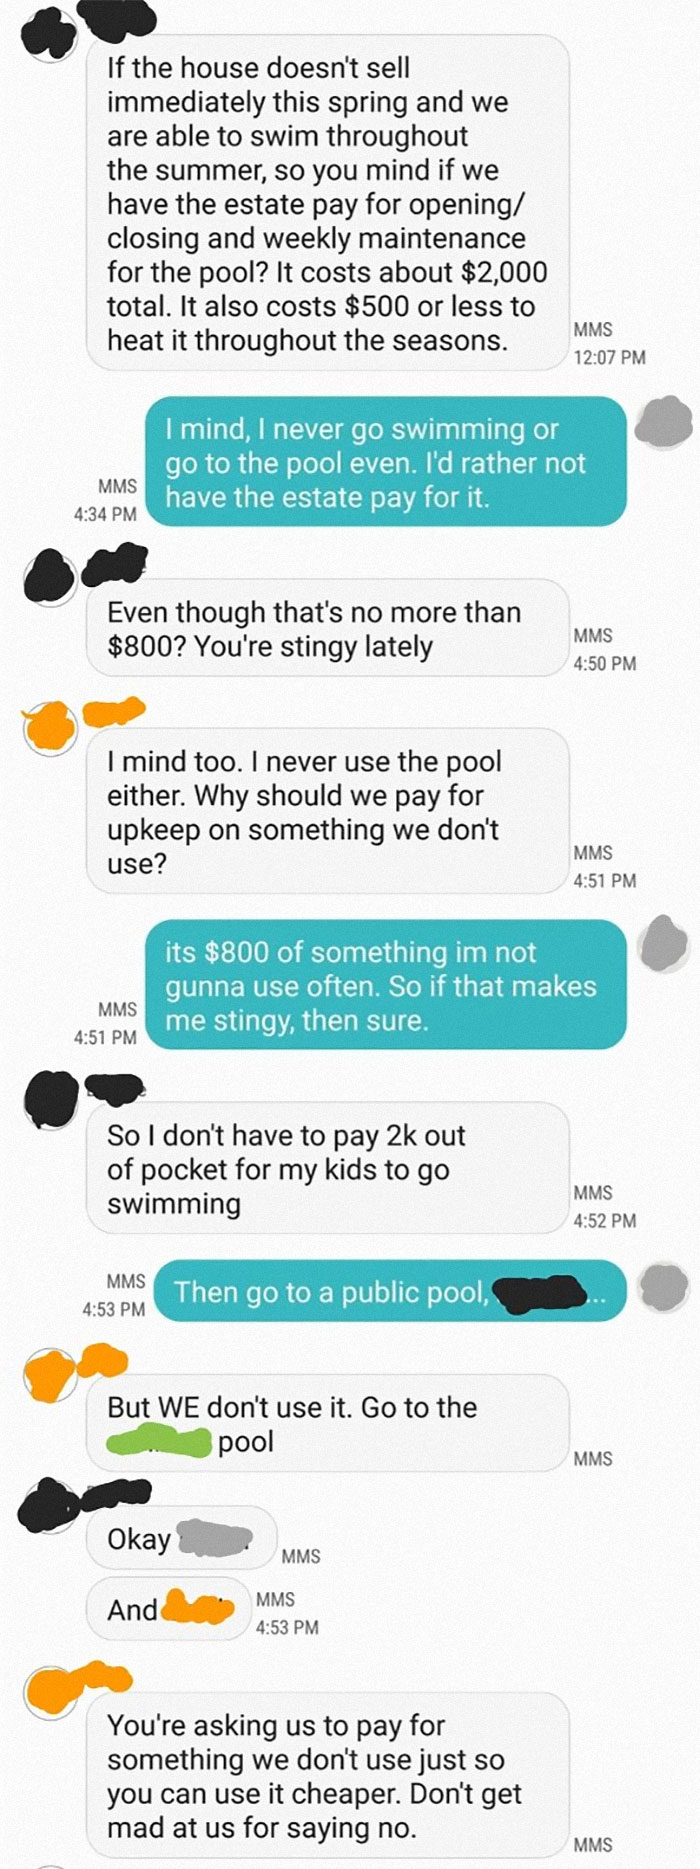 My Sister Wants Me And My Brother To Help Pay For Her And Her Kids To Swim At My Late Father's Pool